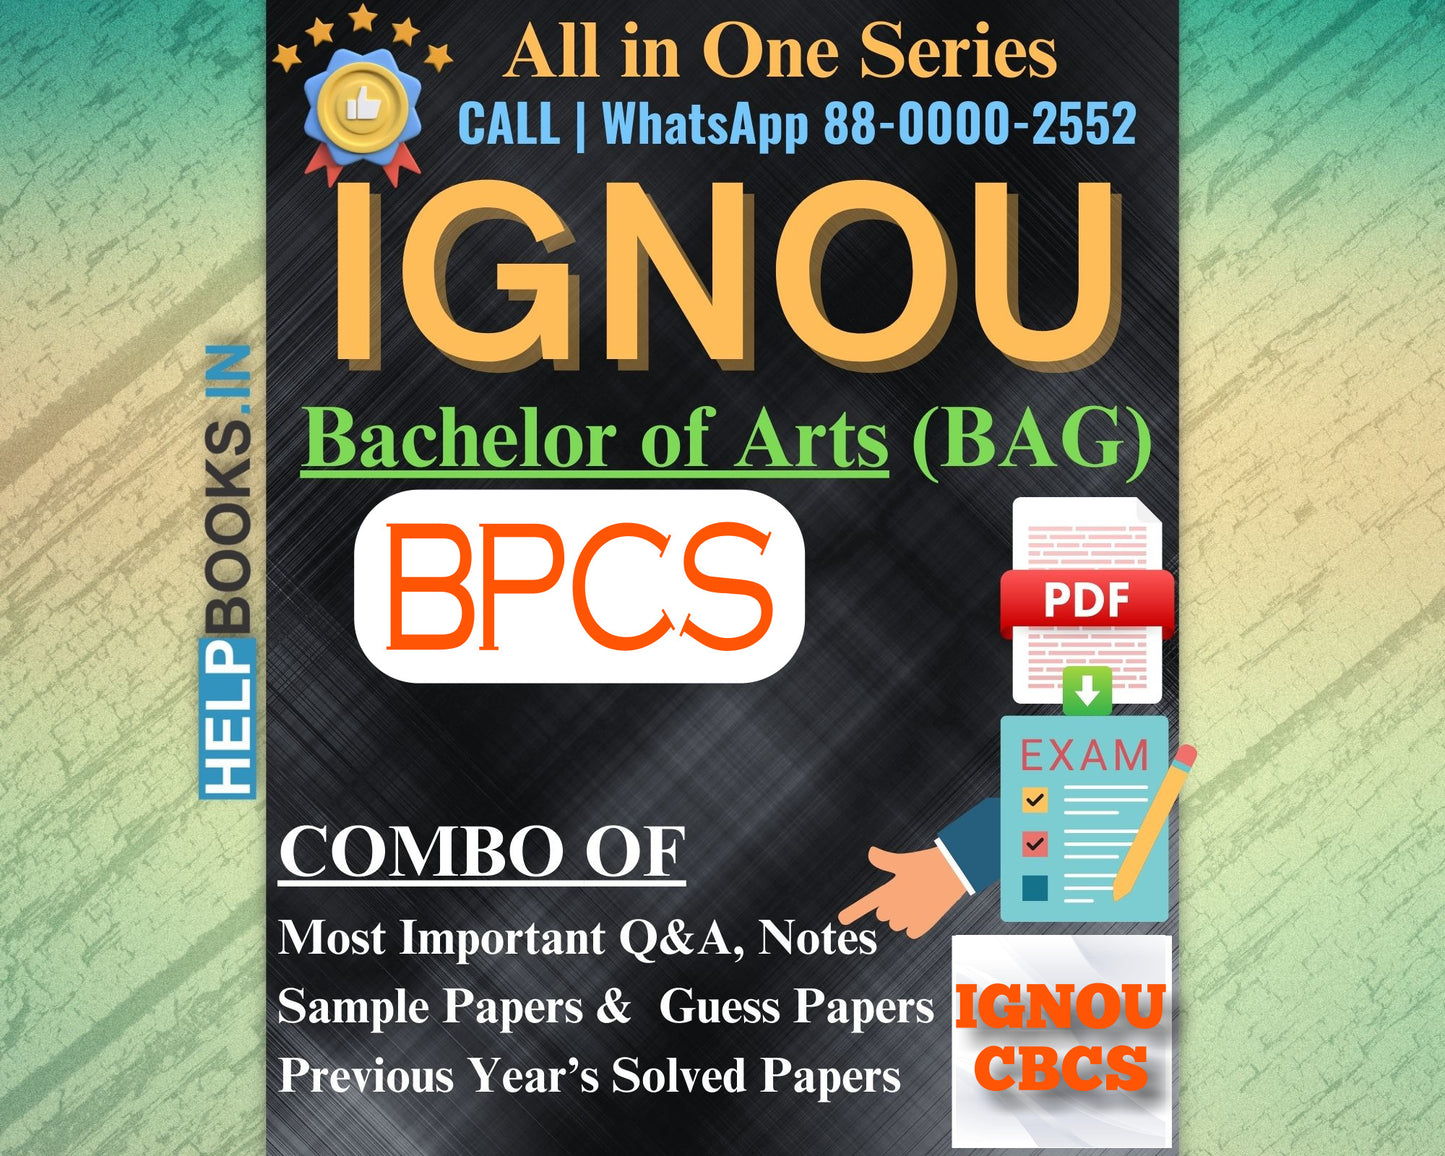 IGNOU BAG Online Study Package: Bachelor of Arts (BA) - Previous Years Solved Papers, Q&A, Exam Notes, Sample Papers, Guess Papers-BPCS183, BPCS184, BPCS185, BPCS186, BPCS187, BPCS188